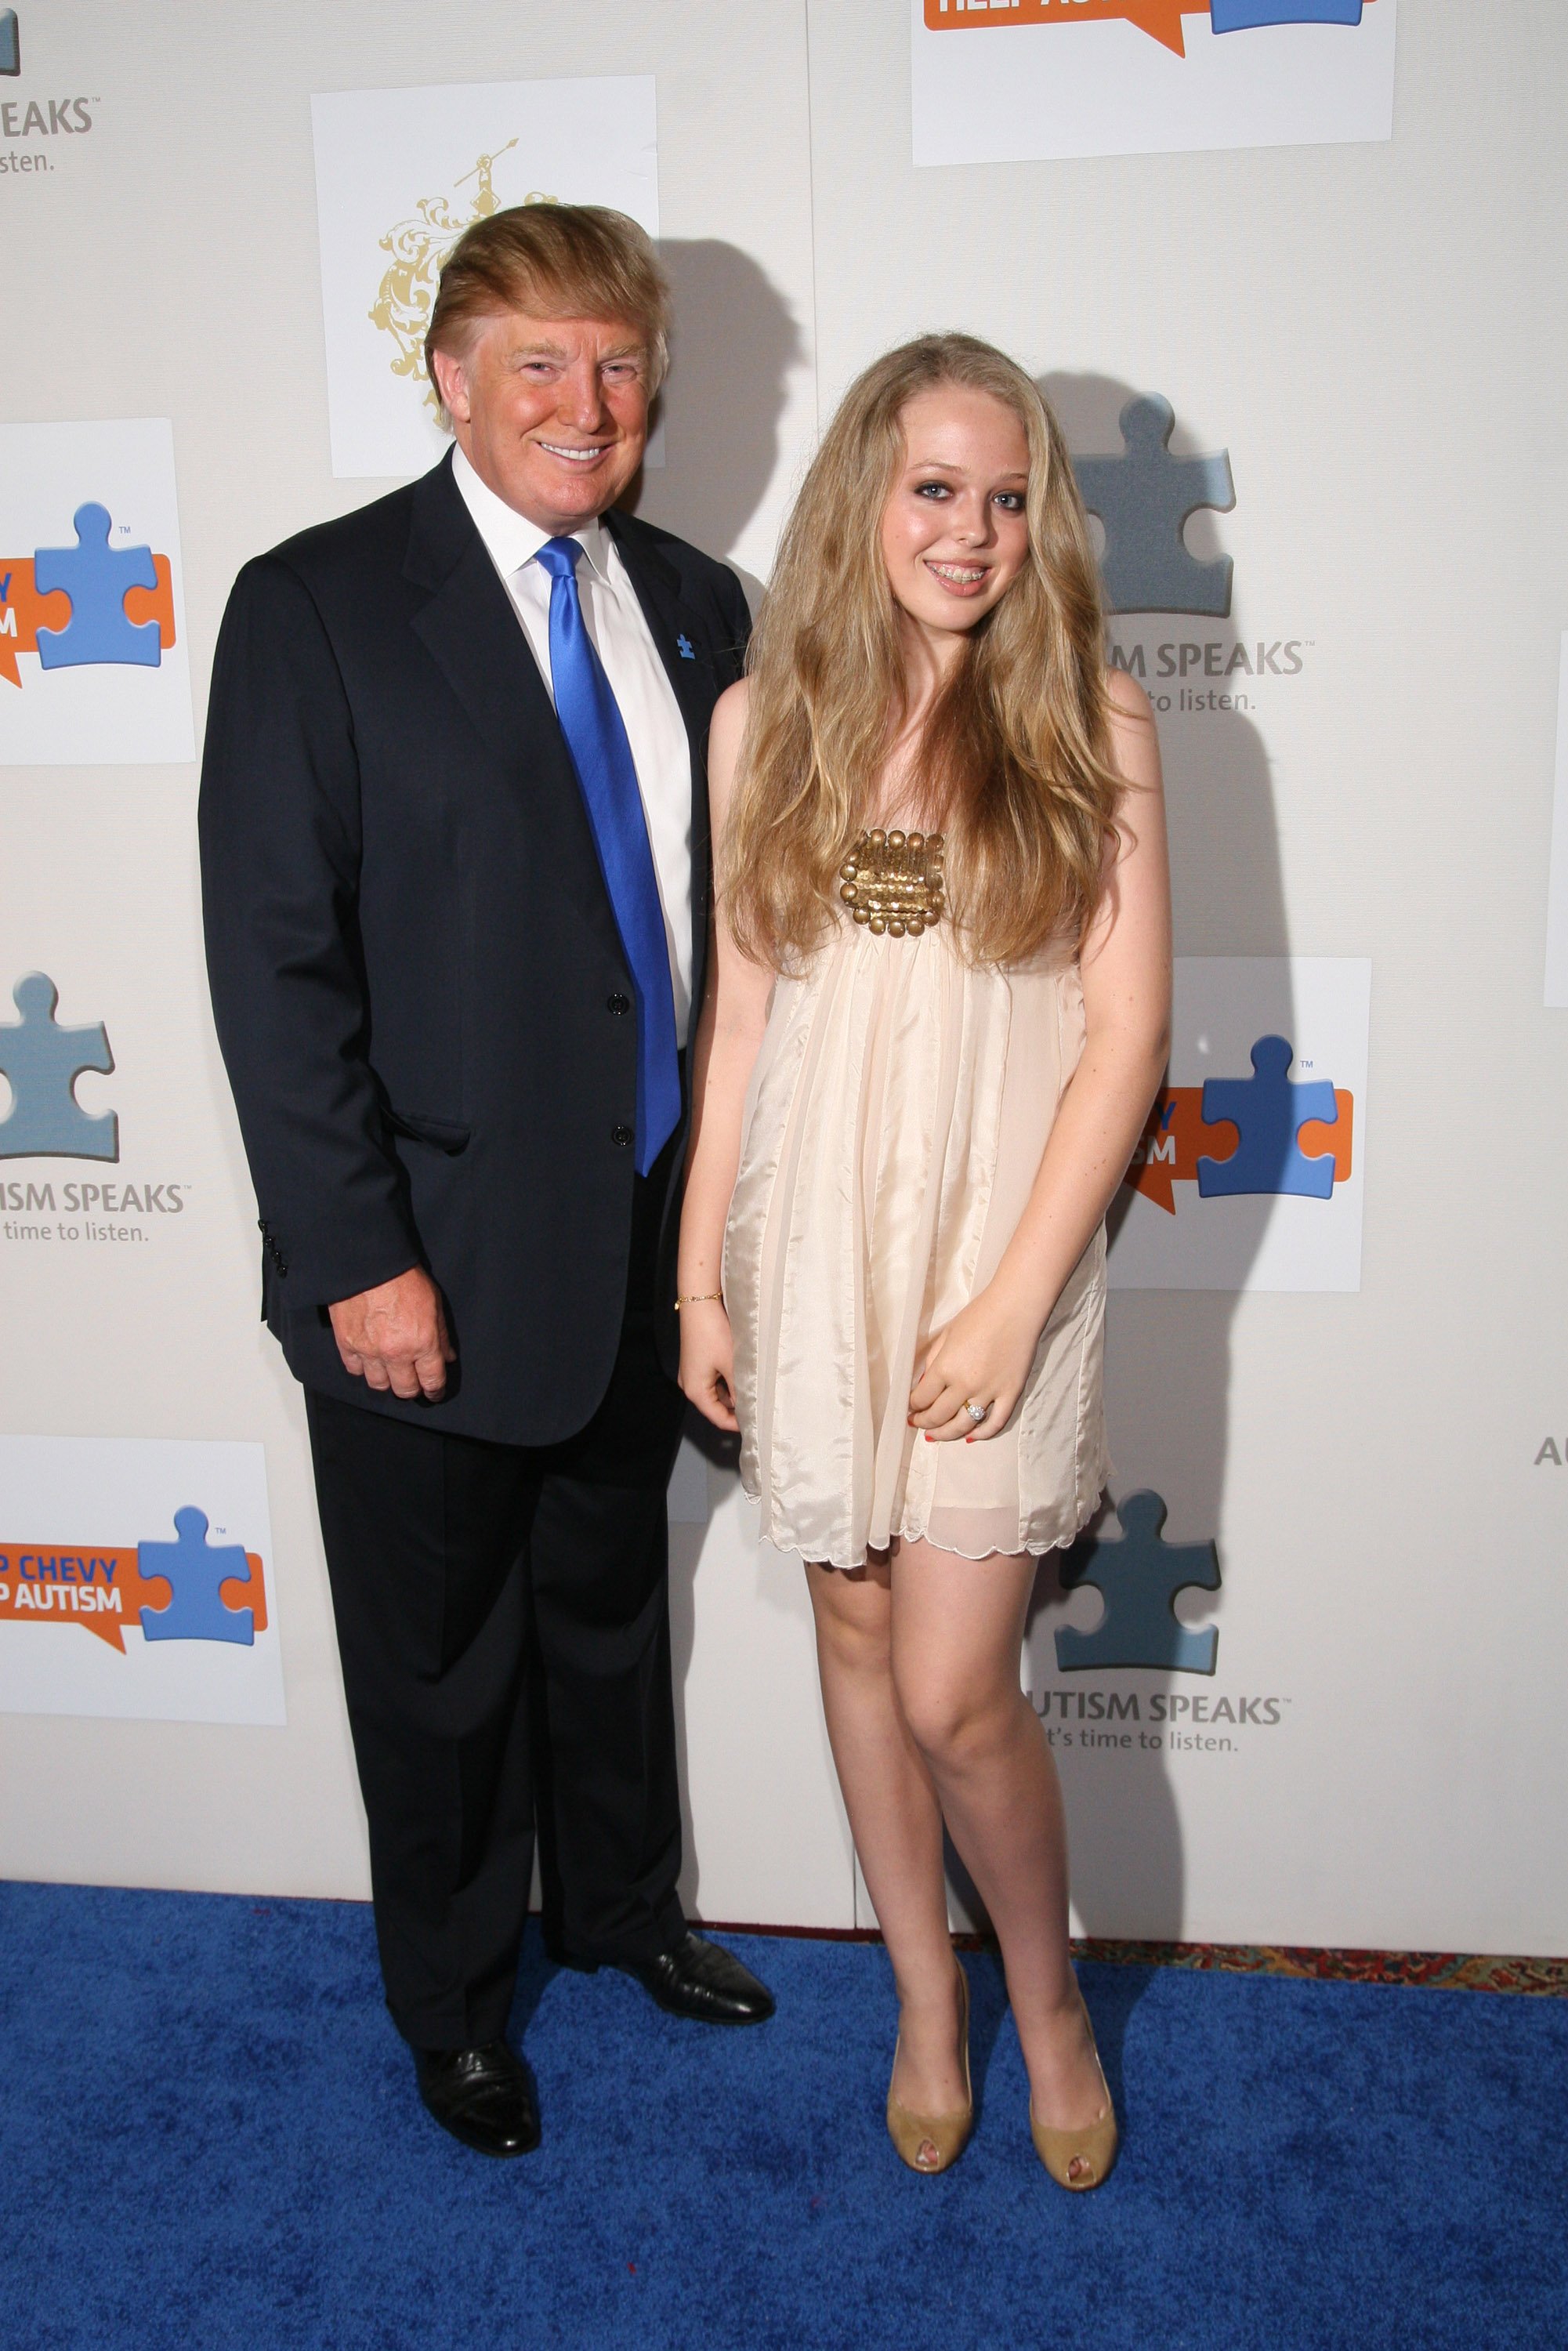 Donald Trump and Tiffany Trump pose on the red carpet for Autism Speaks at the Mar-a-lago Club on March 30, 2008 in Palm Beach, Florida. | Photo: GettyImages